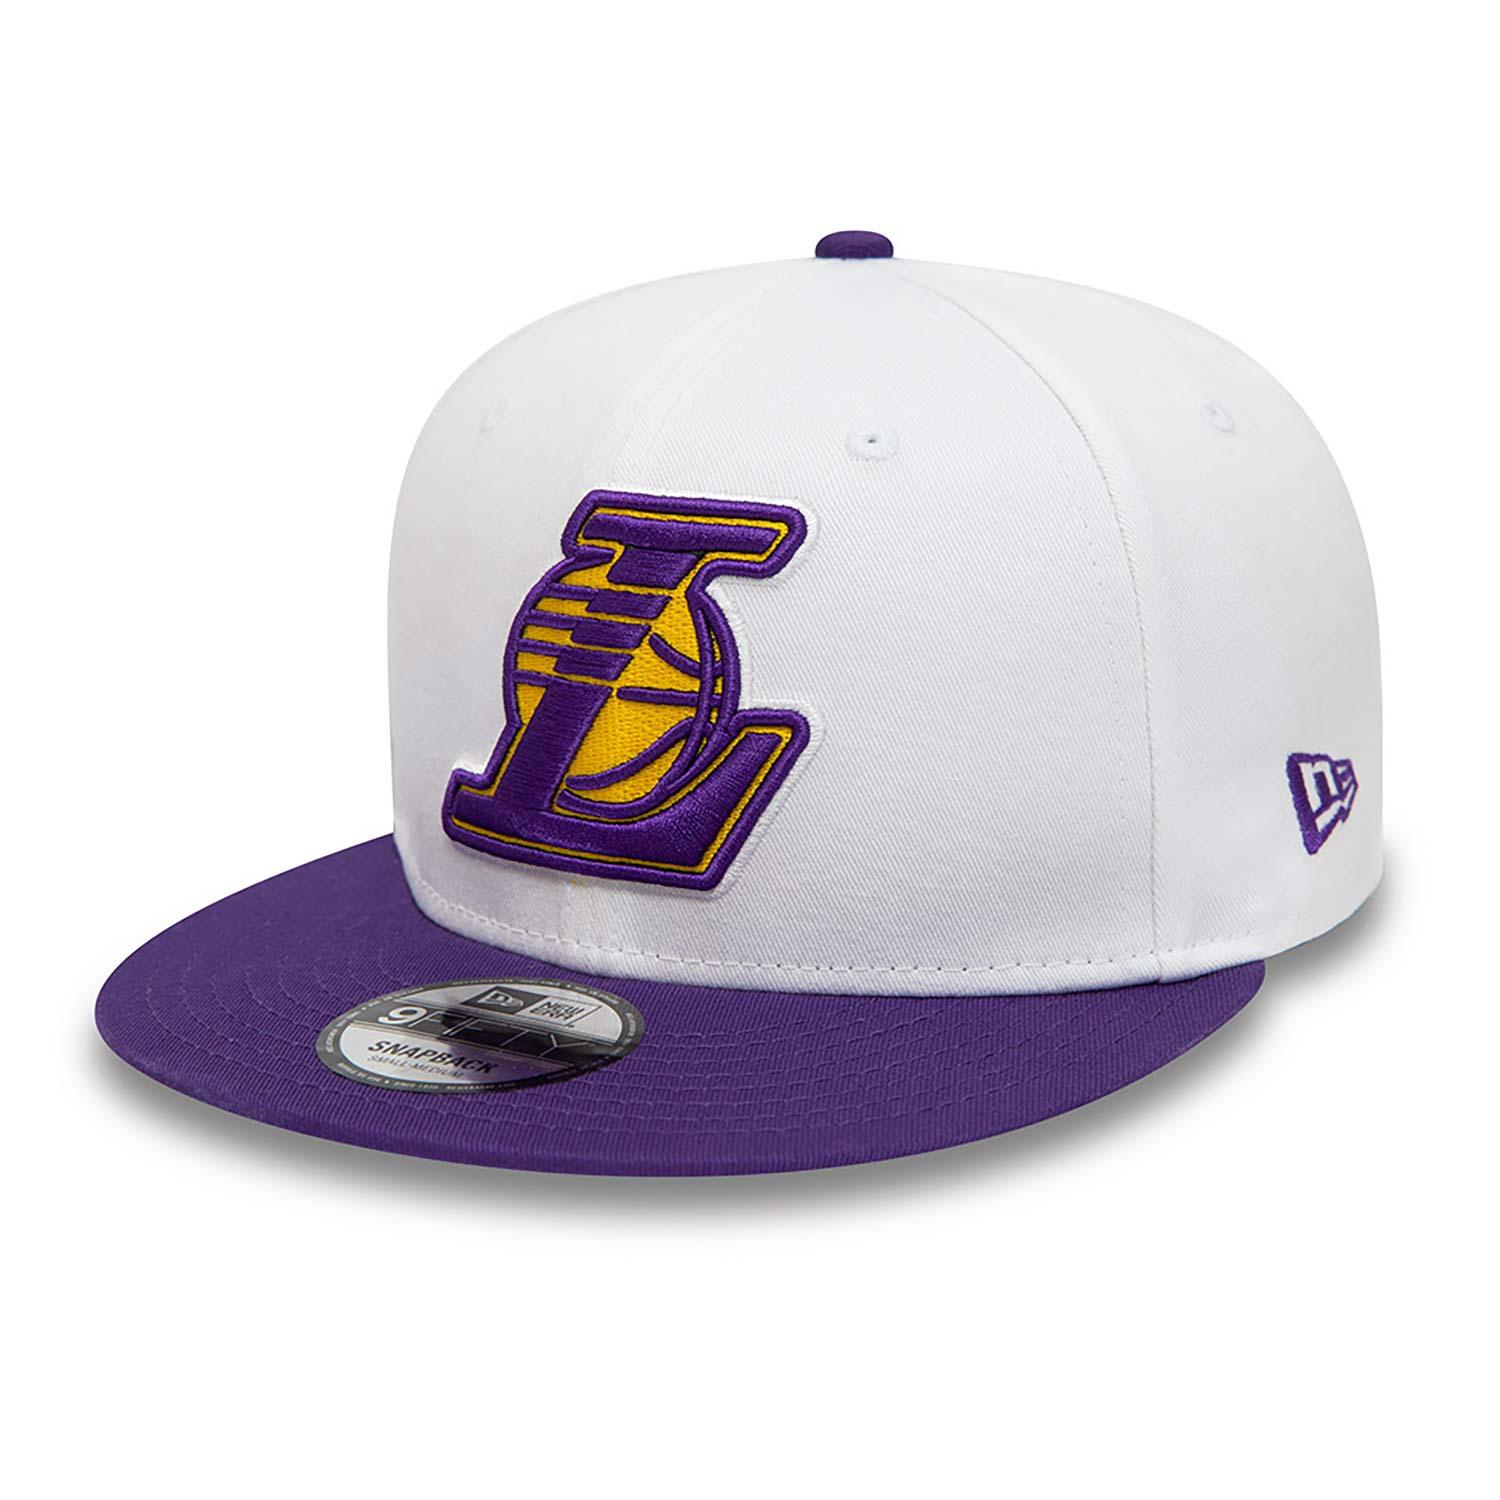 NEW ERA 9FIFTY WHITE CROWN PATCHES LOS ANGELES LAKERS TWO TONE SNAPBACK - FAM